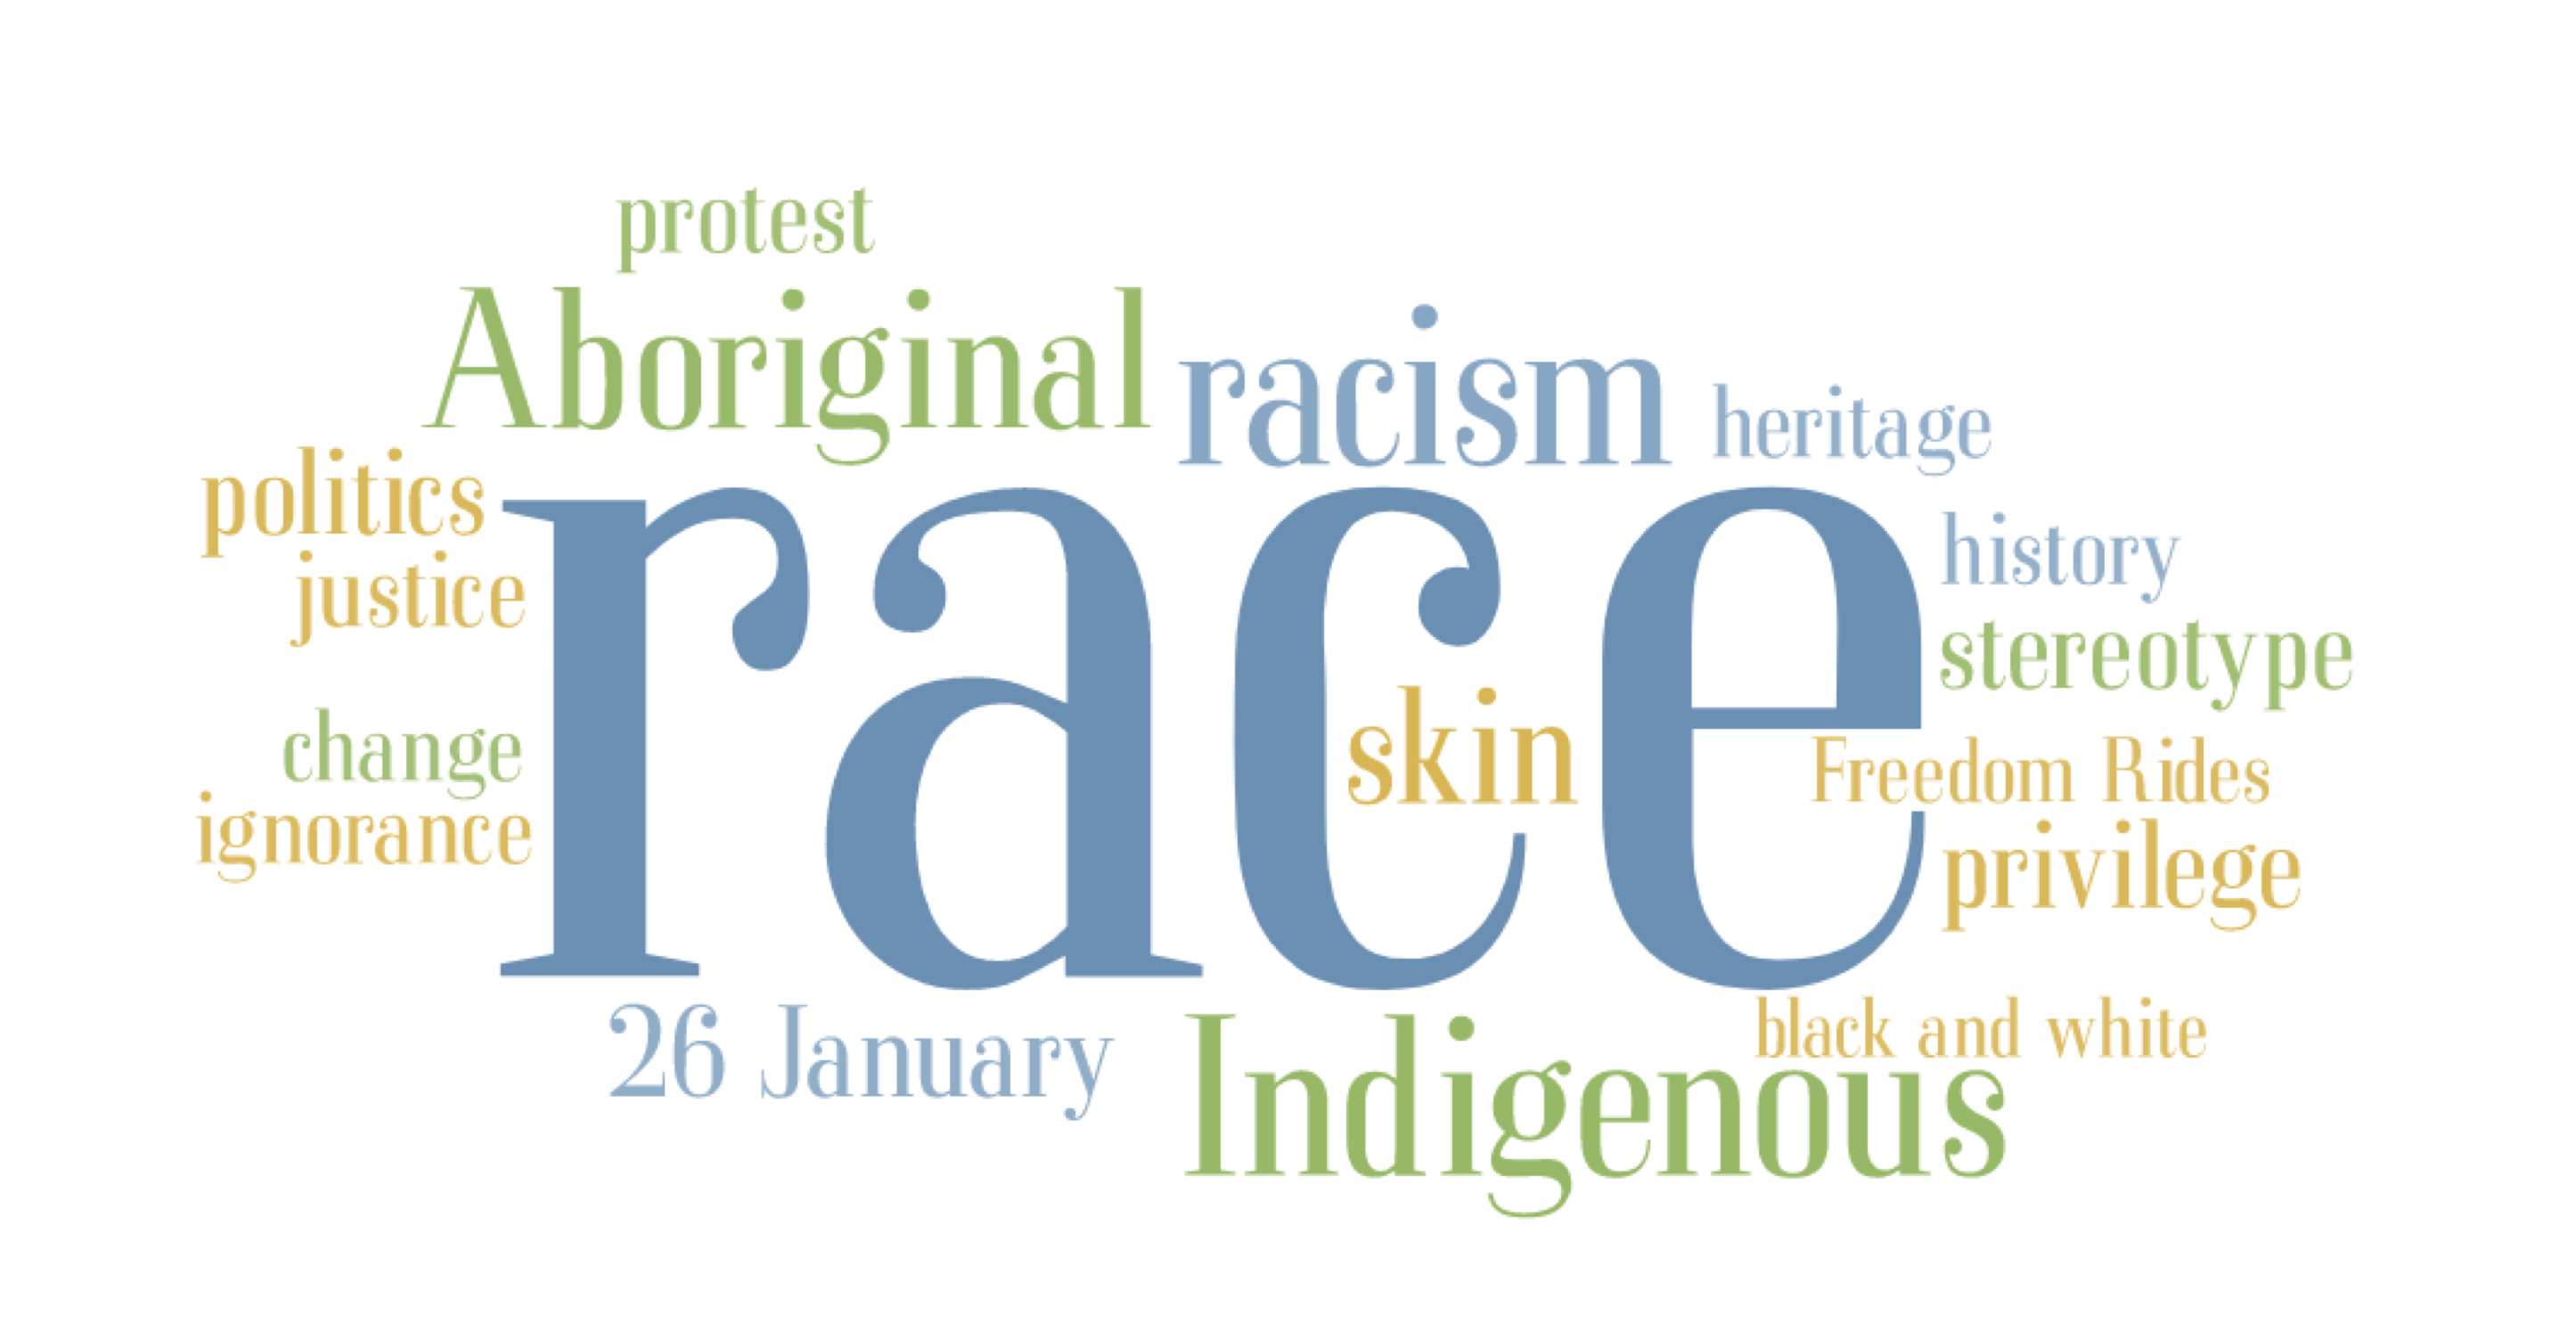 A word cloud for the word, race. Surrounding words include Aboriginal, Indigenous, racism, 26 January, privilege, politics and stereotypes, amongst others.